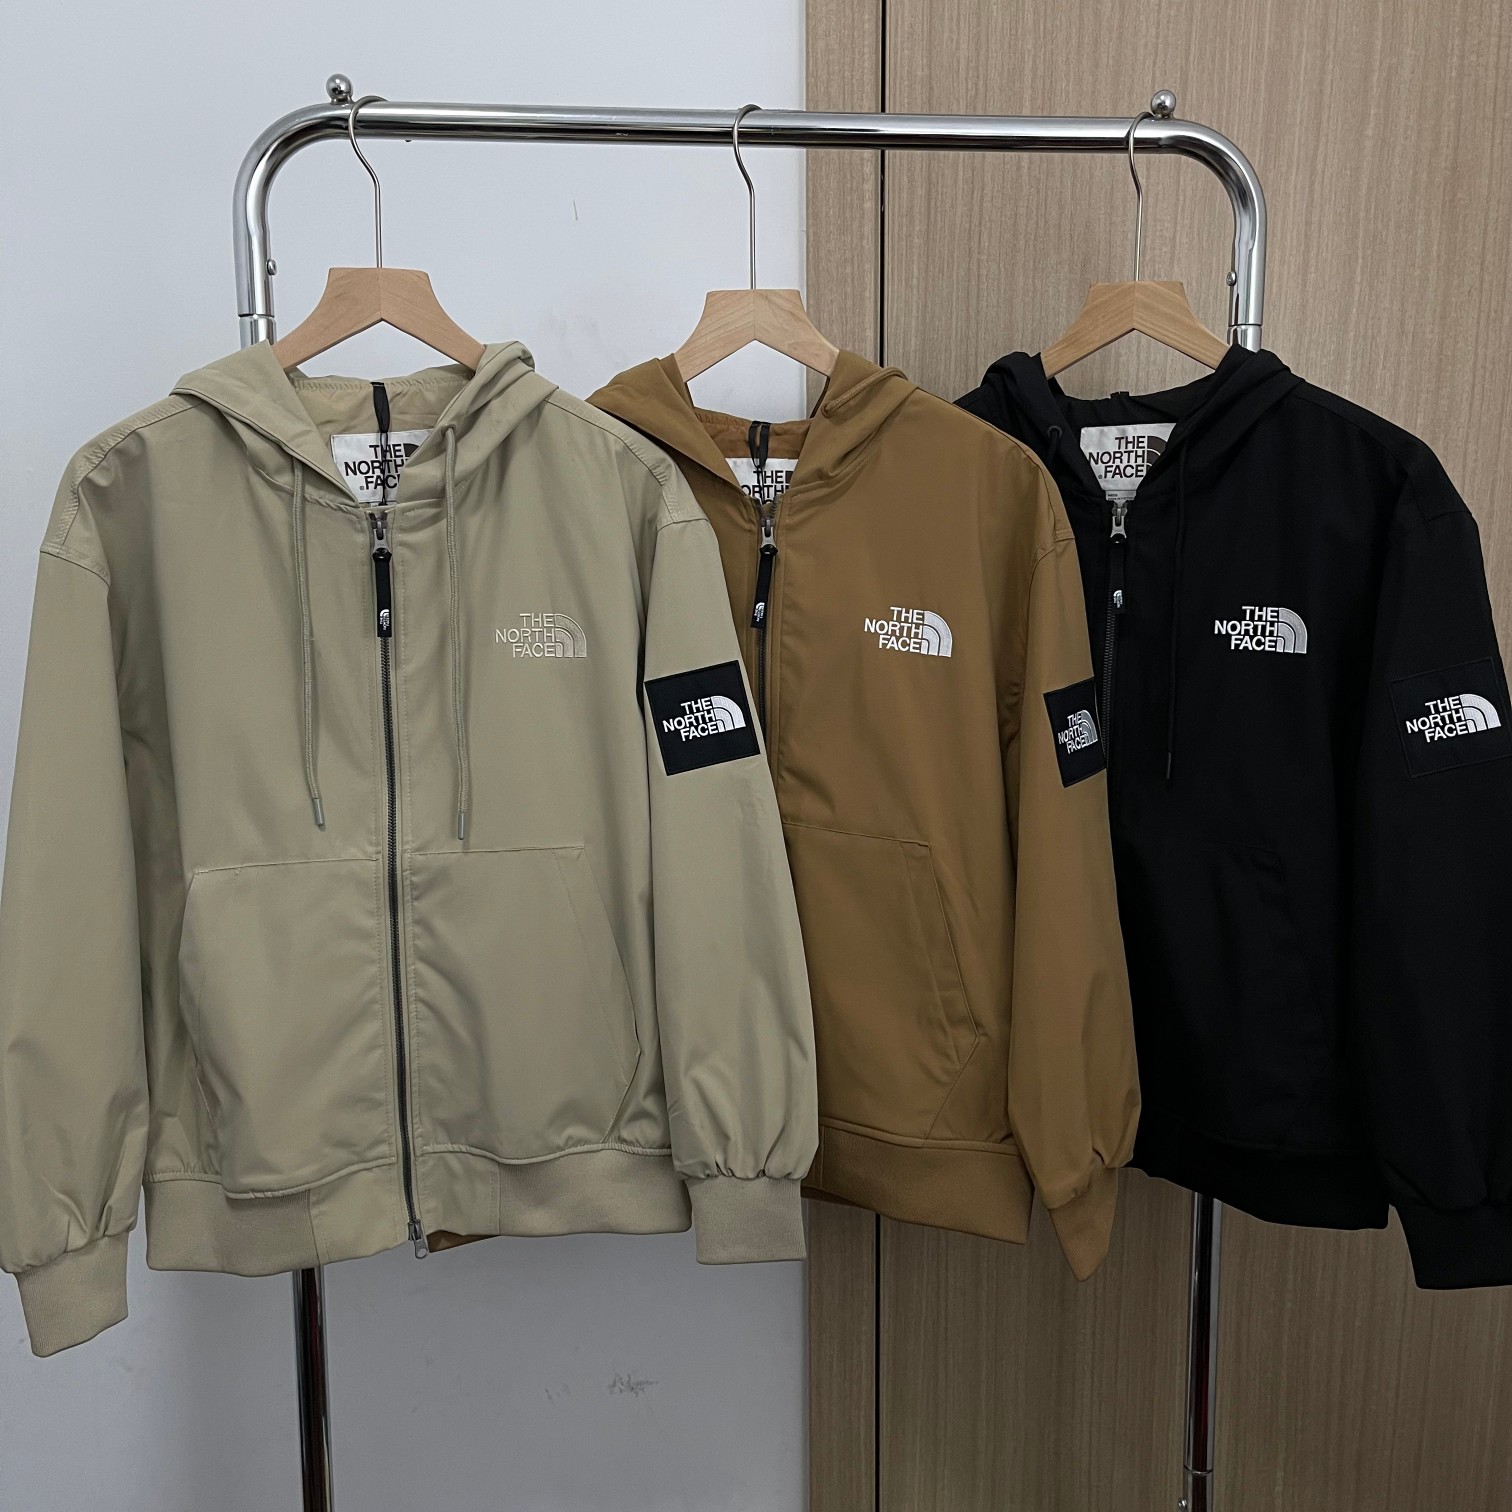 The North Face Clothing Coats & Jackets Black Grey Khaki White Embroidery Unisex Spandex Spring Collection Vintage Hooded Top